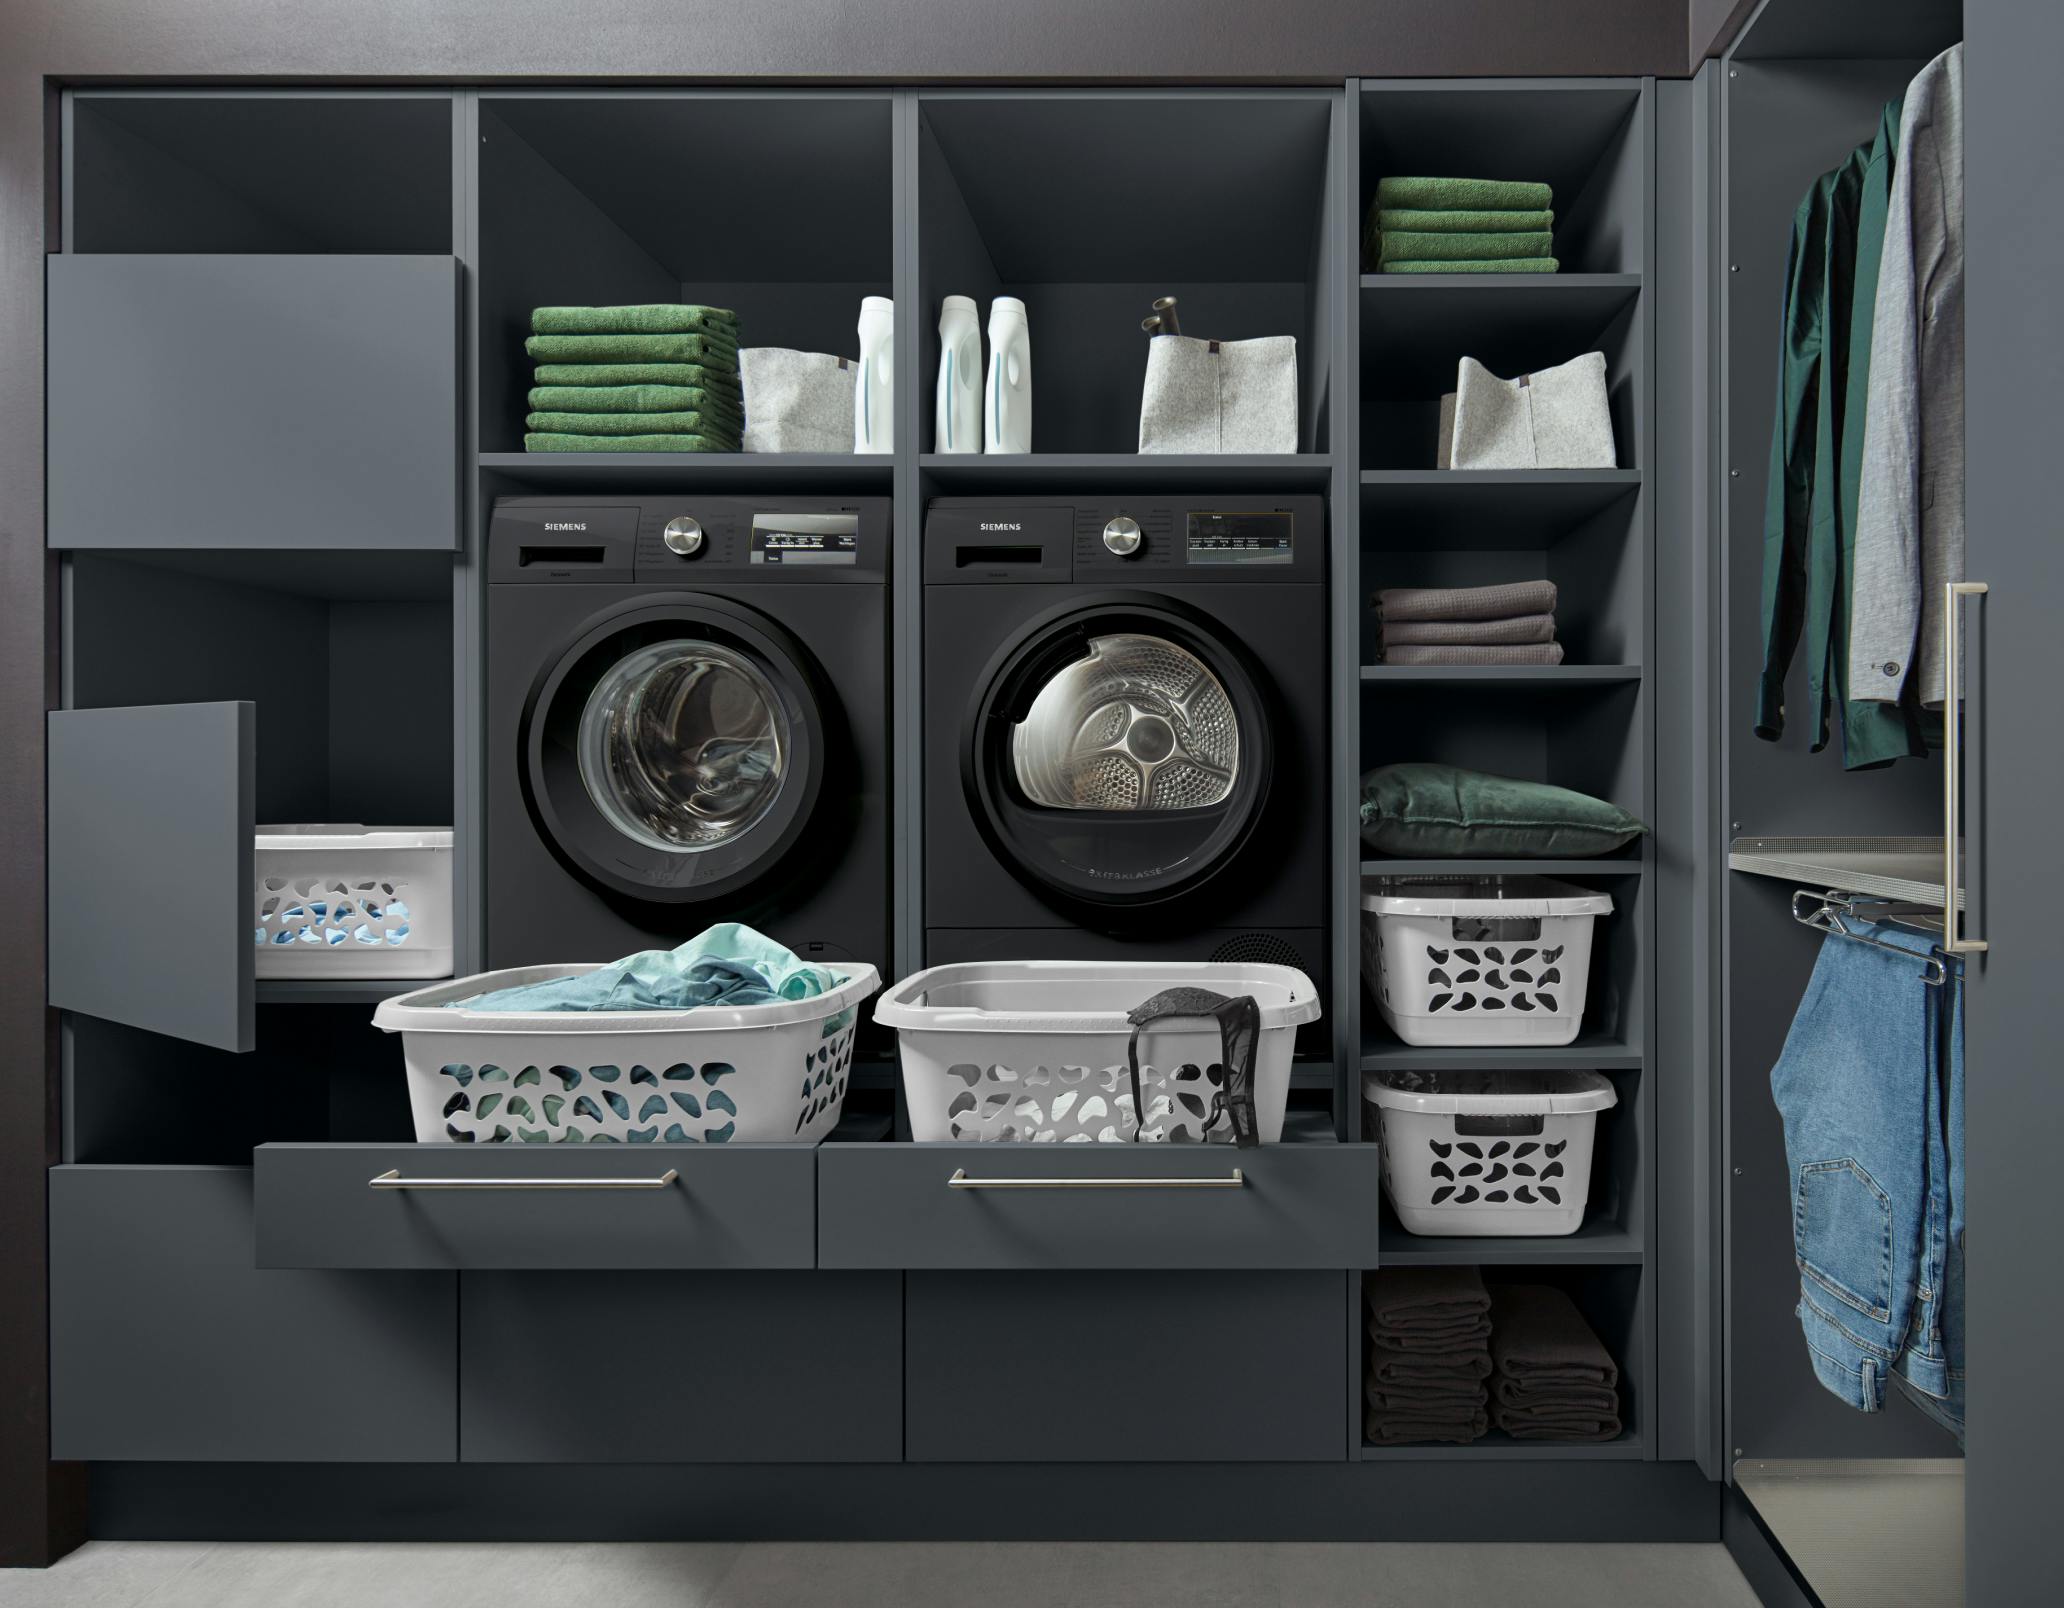 laundry room design with wood style and white color with a lot of space to put your clothes and other stuffs in it